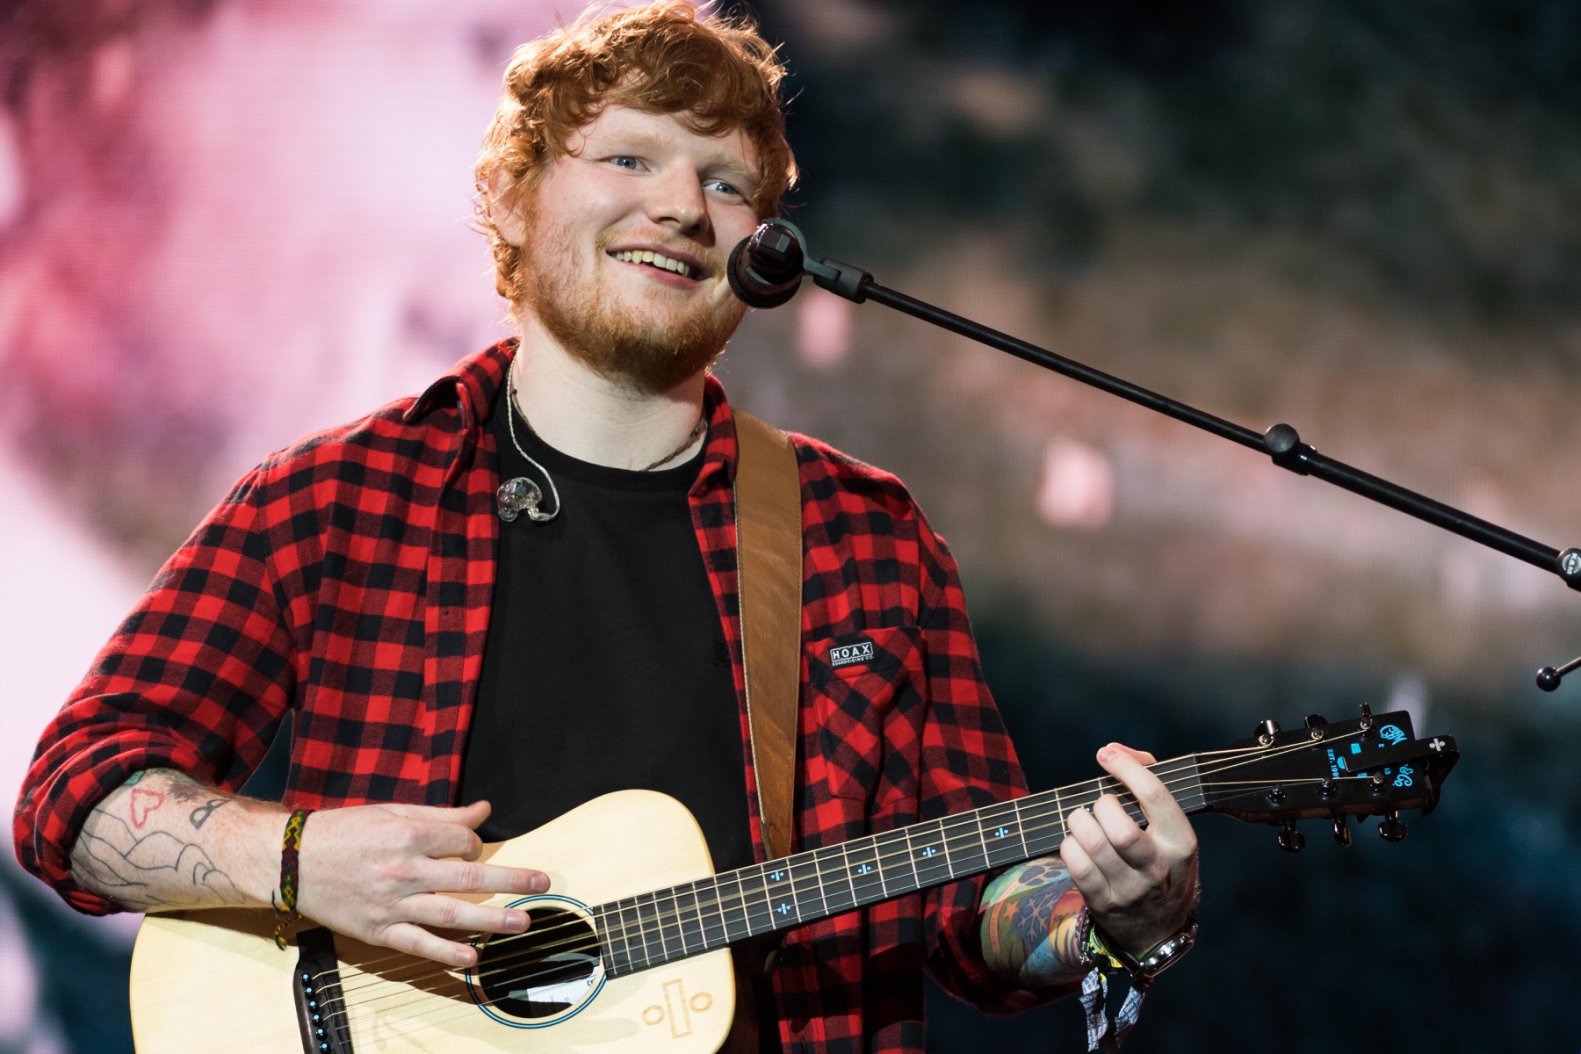 Ed Sheeran Plays Guitar On The Stand During Marvin Gaye Copyright Trial